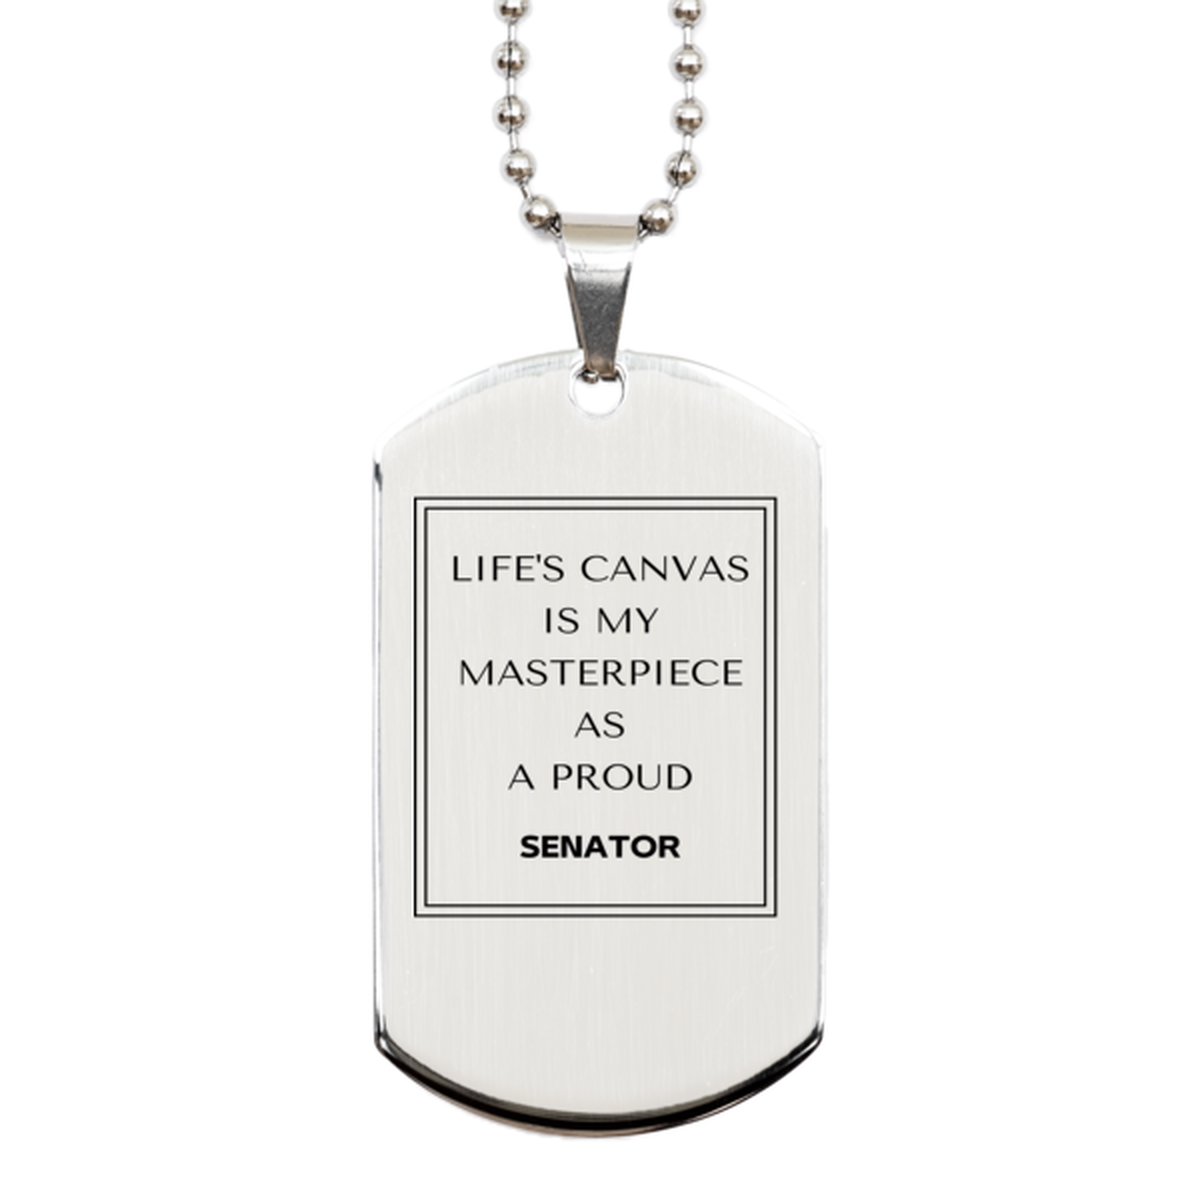 Proud Senator Gifts, Life's canvas is my masterpiece, Epic Birthday Christmas Unique Silver Dog Tag For Senator, Coworkers, Men, Women, Friends